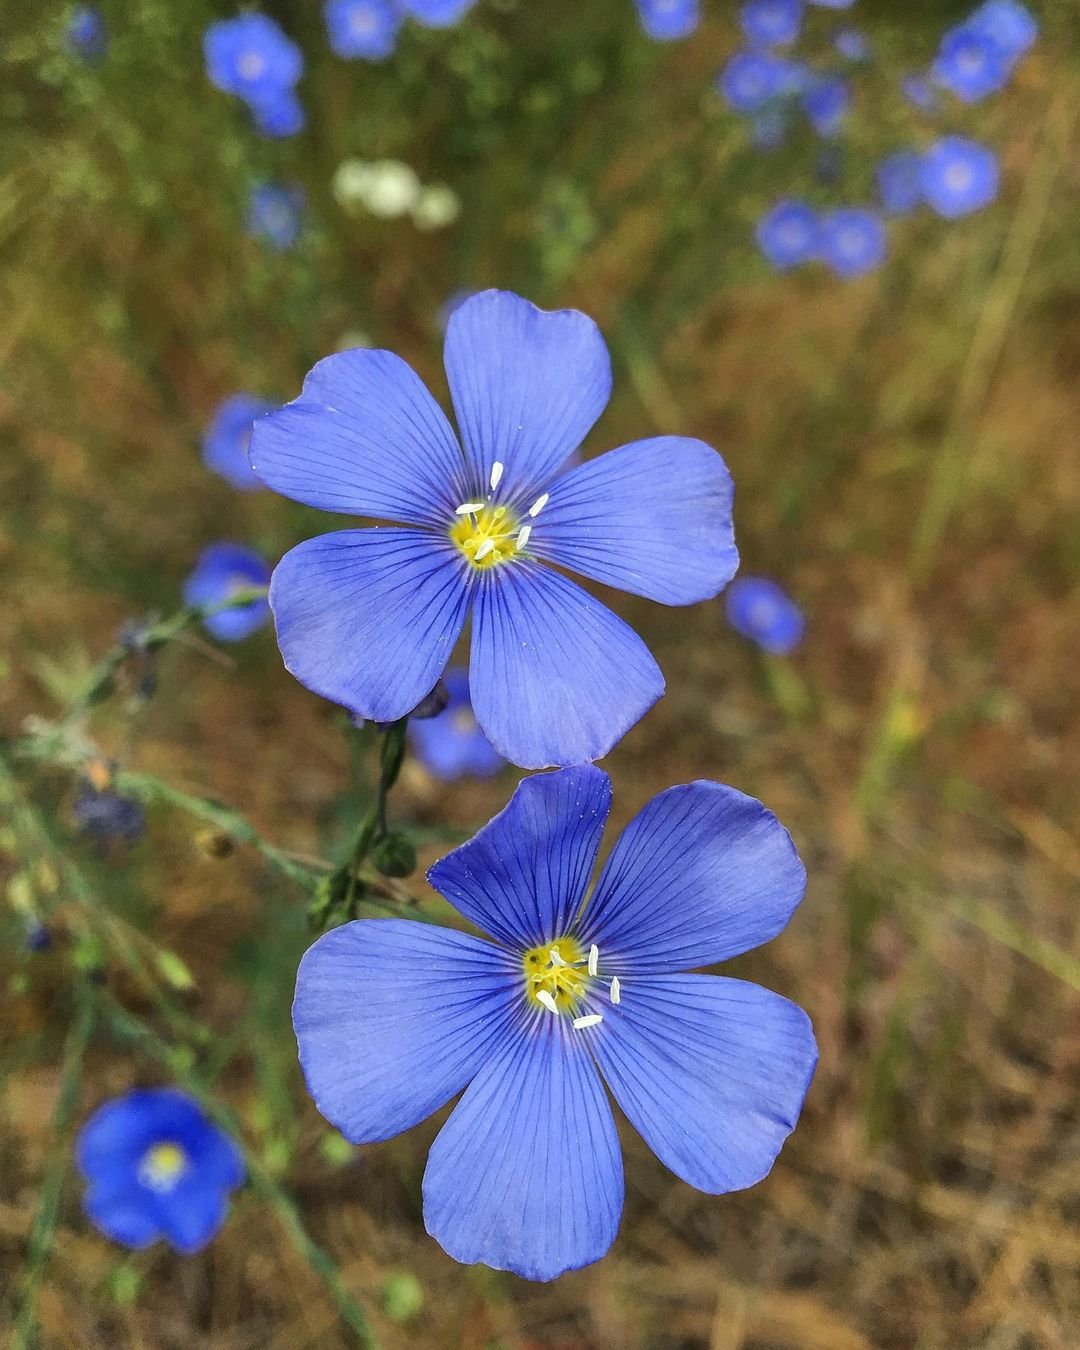 Blue Flax (Linum perenne) - A beautiful perennial plant with delicate blue flowers and slender green stems.

